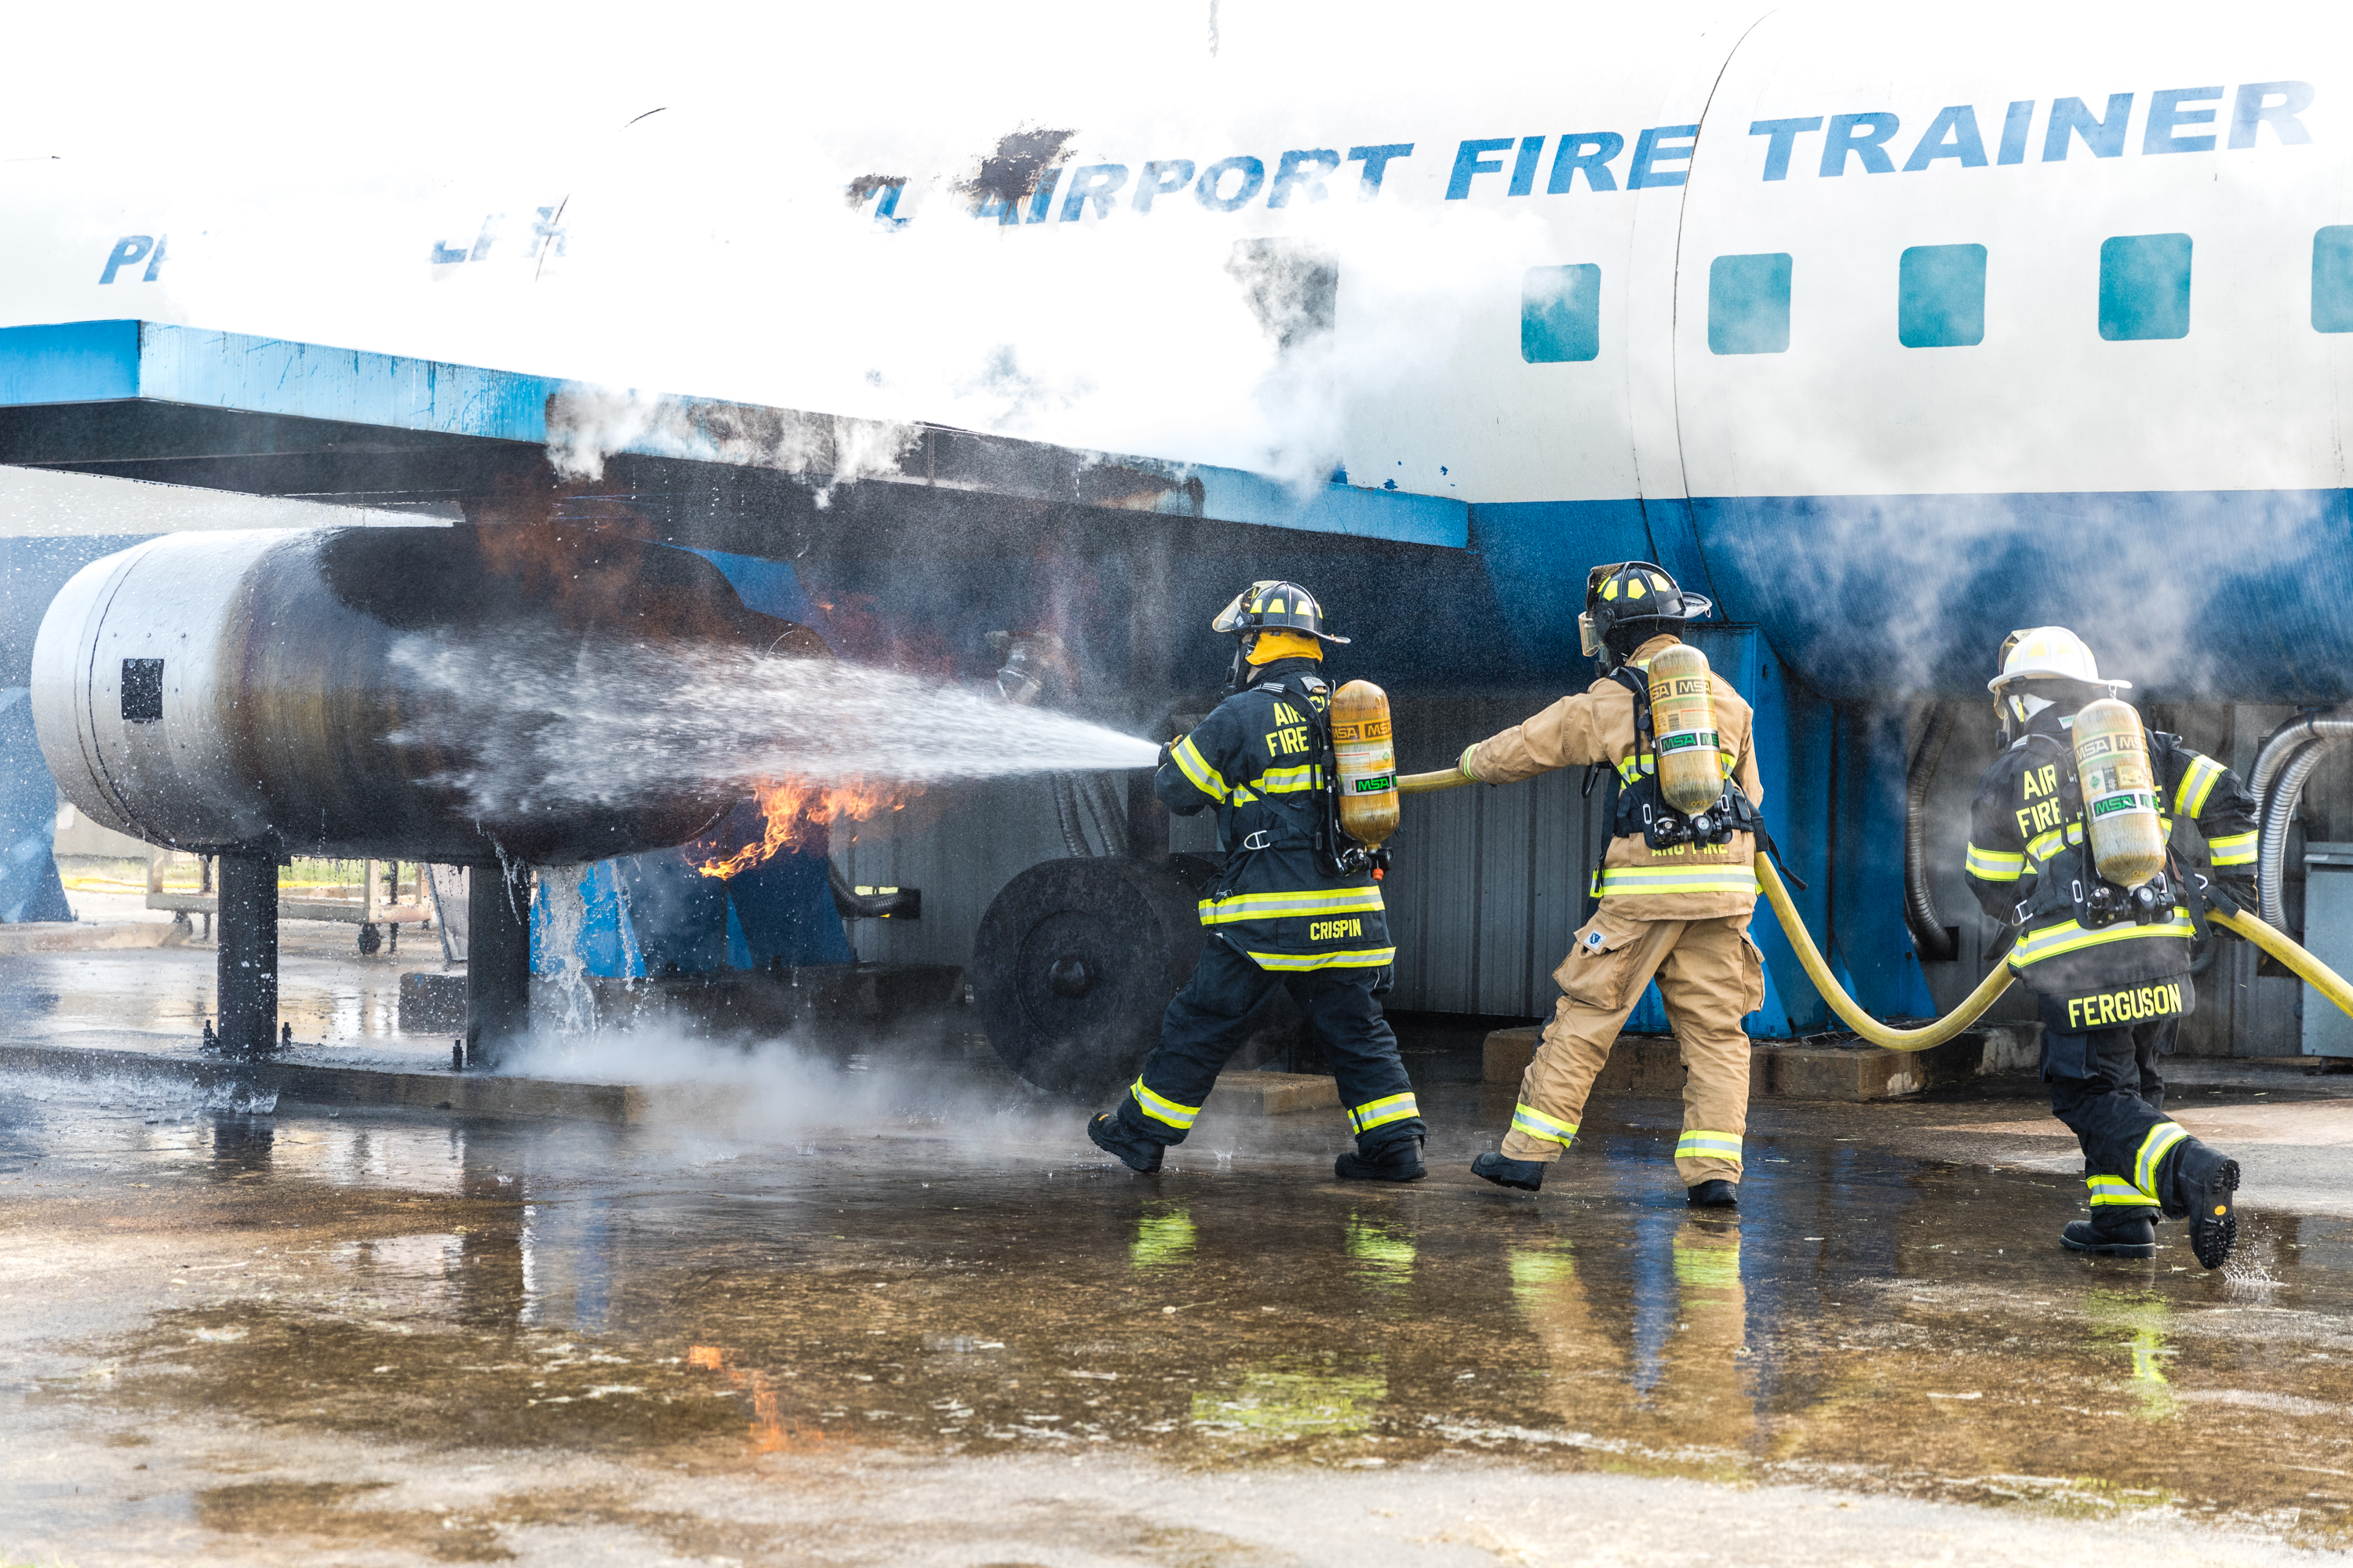 ARFF Firefighters put out a simulated blaze on the Special Aircraft Fire Trainer at PHL.